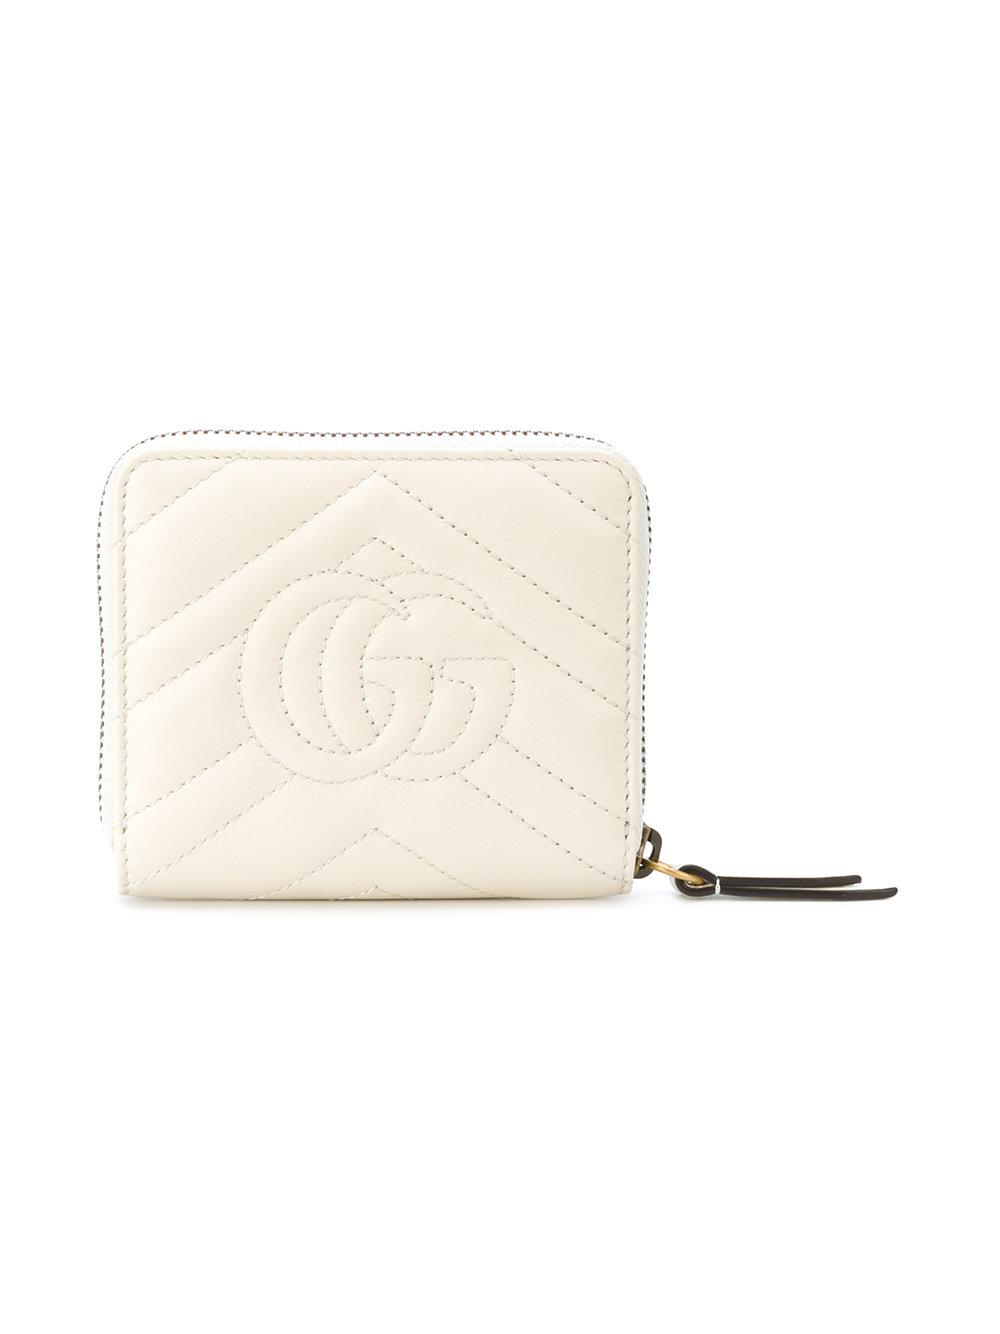 Lightly Use Gucci Credit Card Wallet White Leather Non Smoker